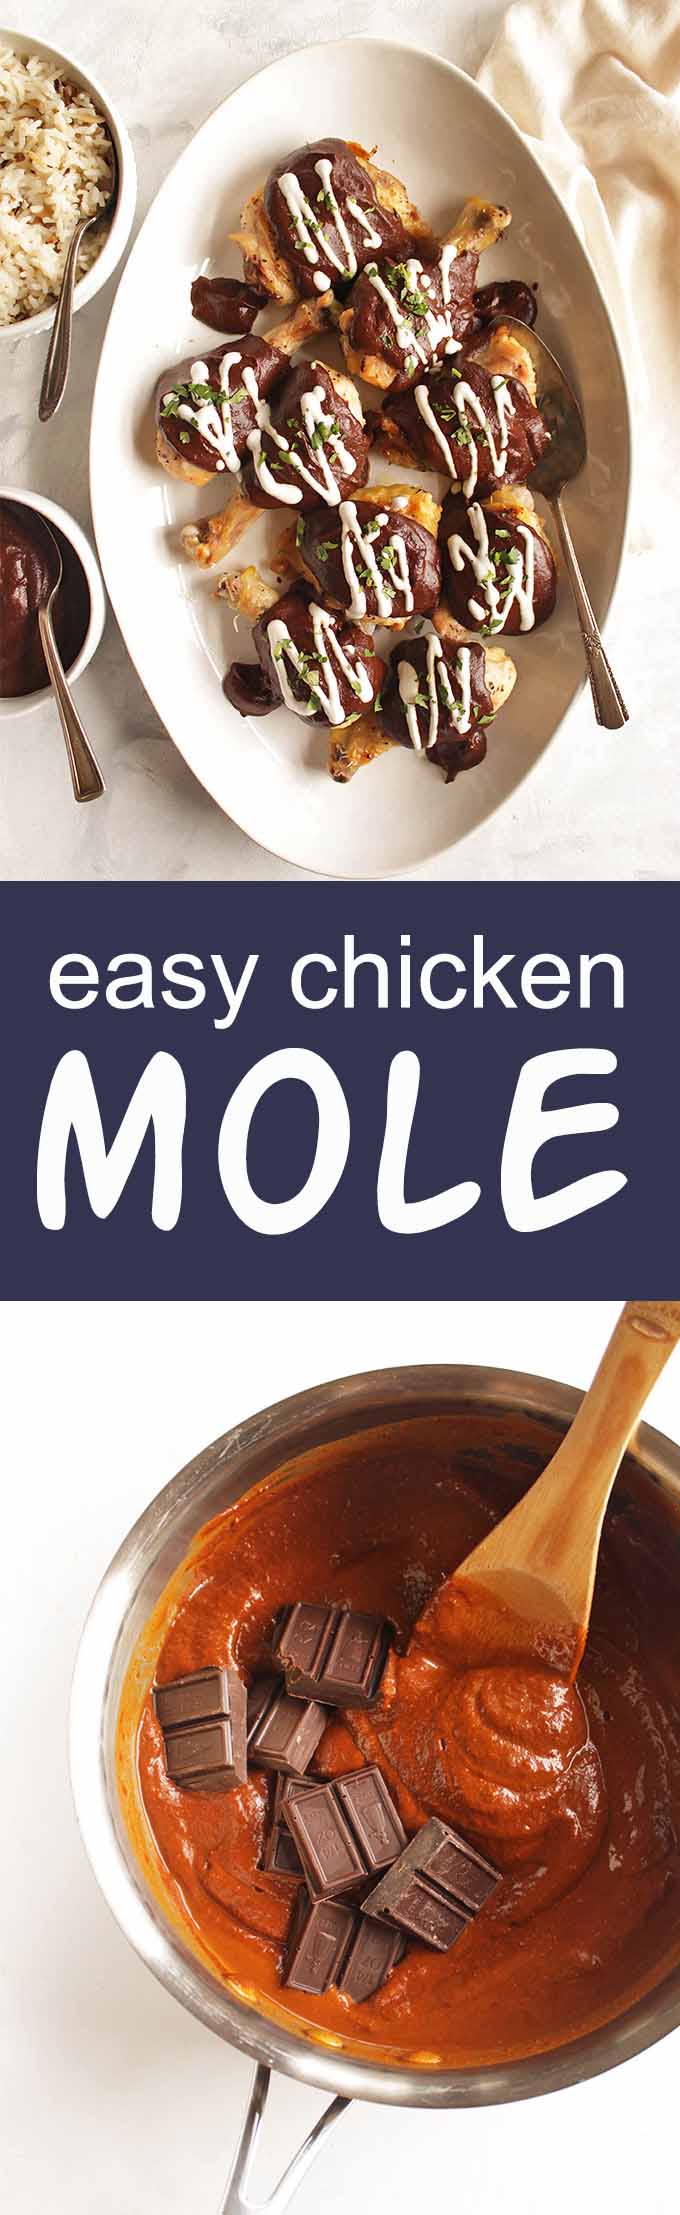 Easy Chicken Mole - a modern twist on a traditional Mexican recipe. Only takes 40 minutes to make! The sauce is savory and sweet, with a hint of spice and smokiness, serve it over some roasted chicken and rice. This recipe is great for feeding a large crowd and it freezes nicely. Gluten Free | robustrecipes.com